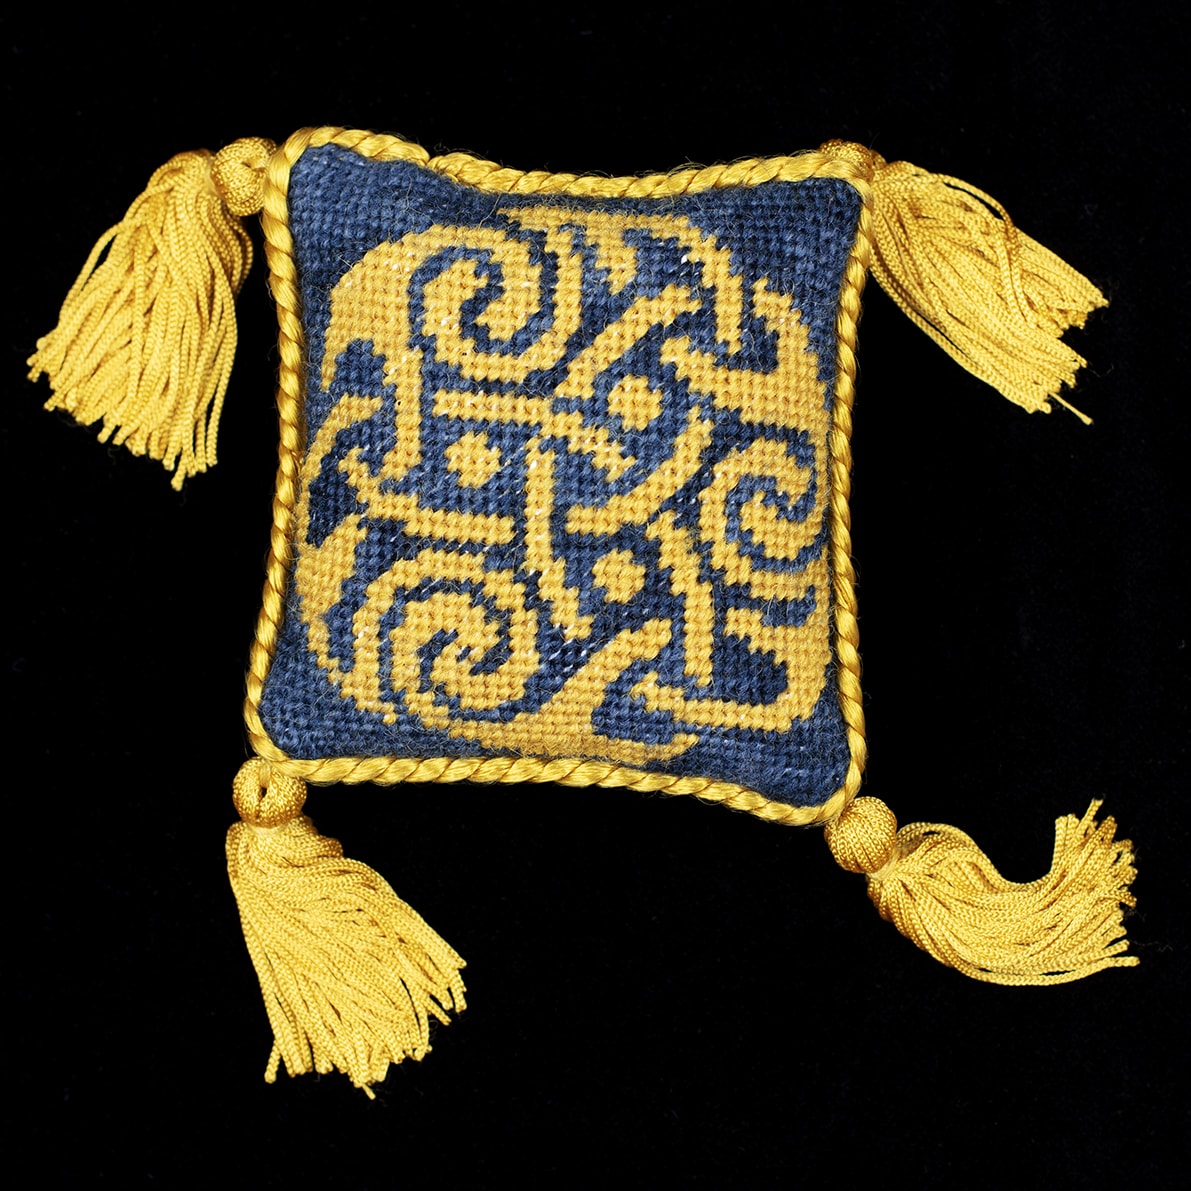 Needlepoint design from the book Celtic Needlepoint by Alice Starmore